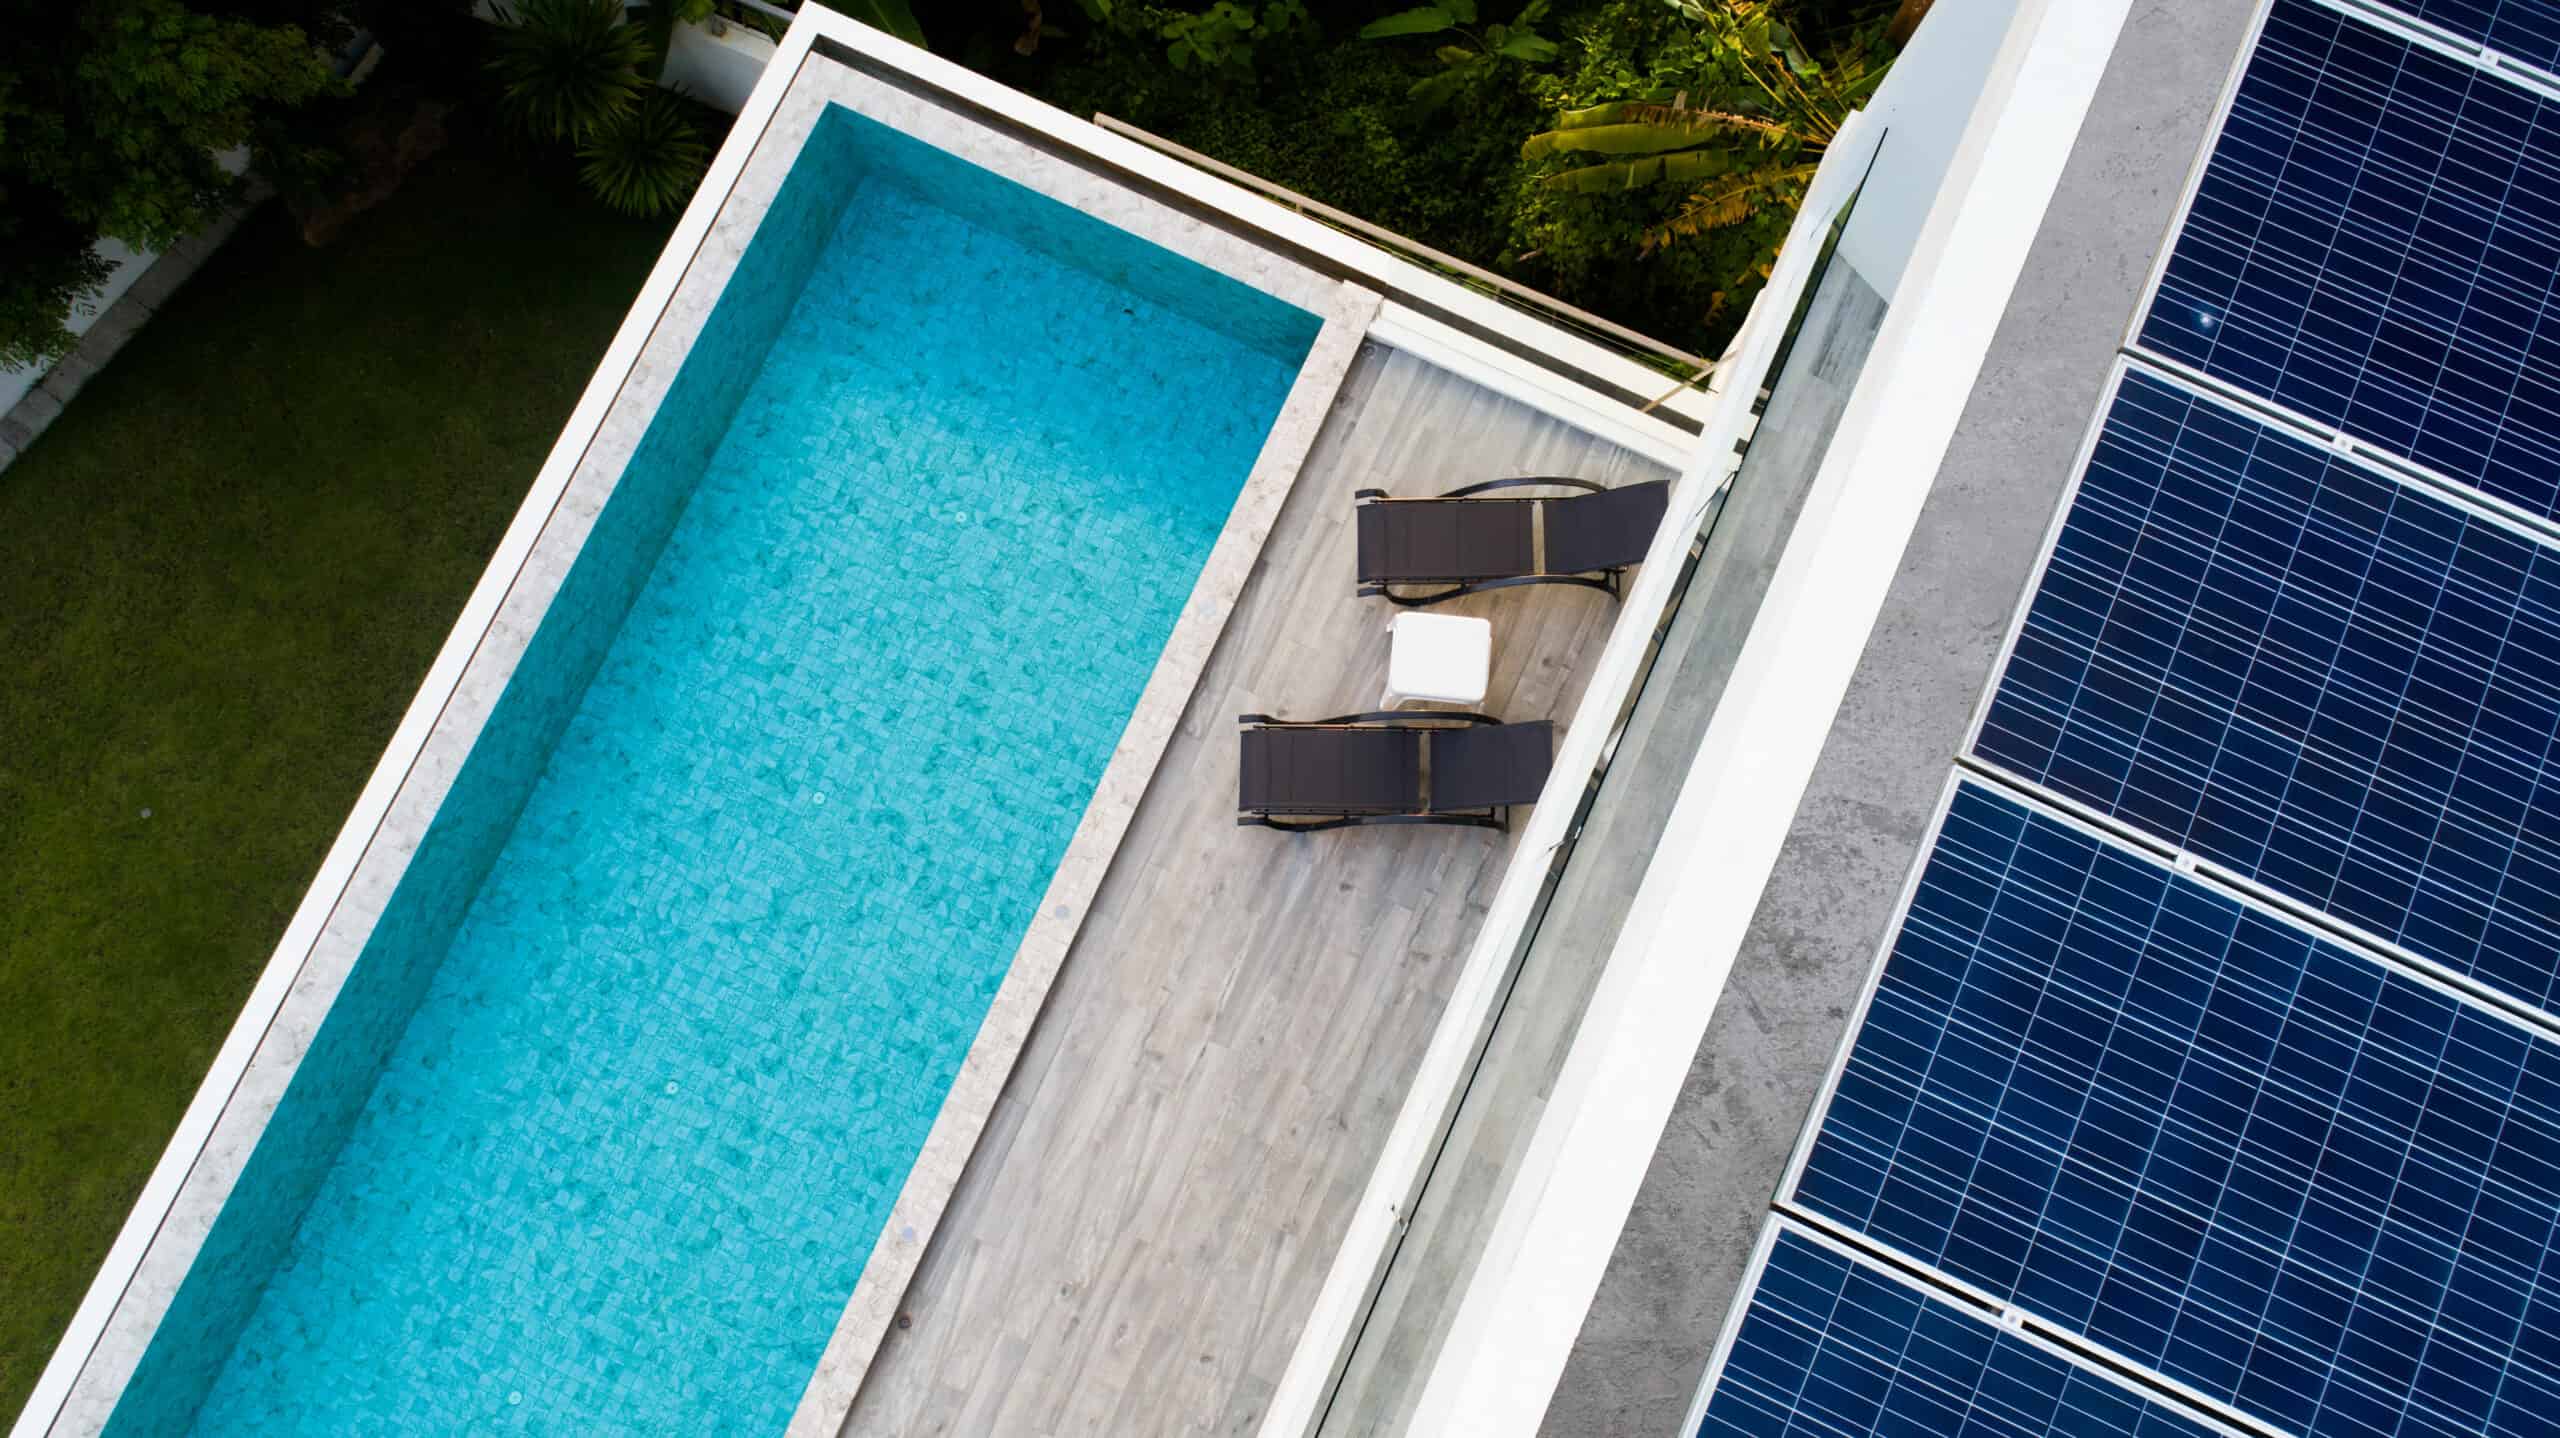 Aerial view of swimming pool and solar panels